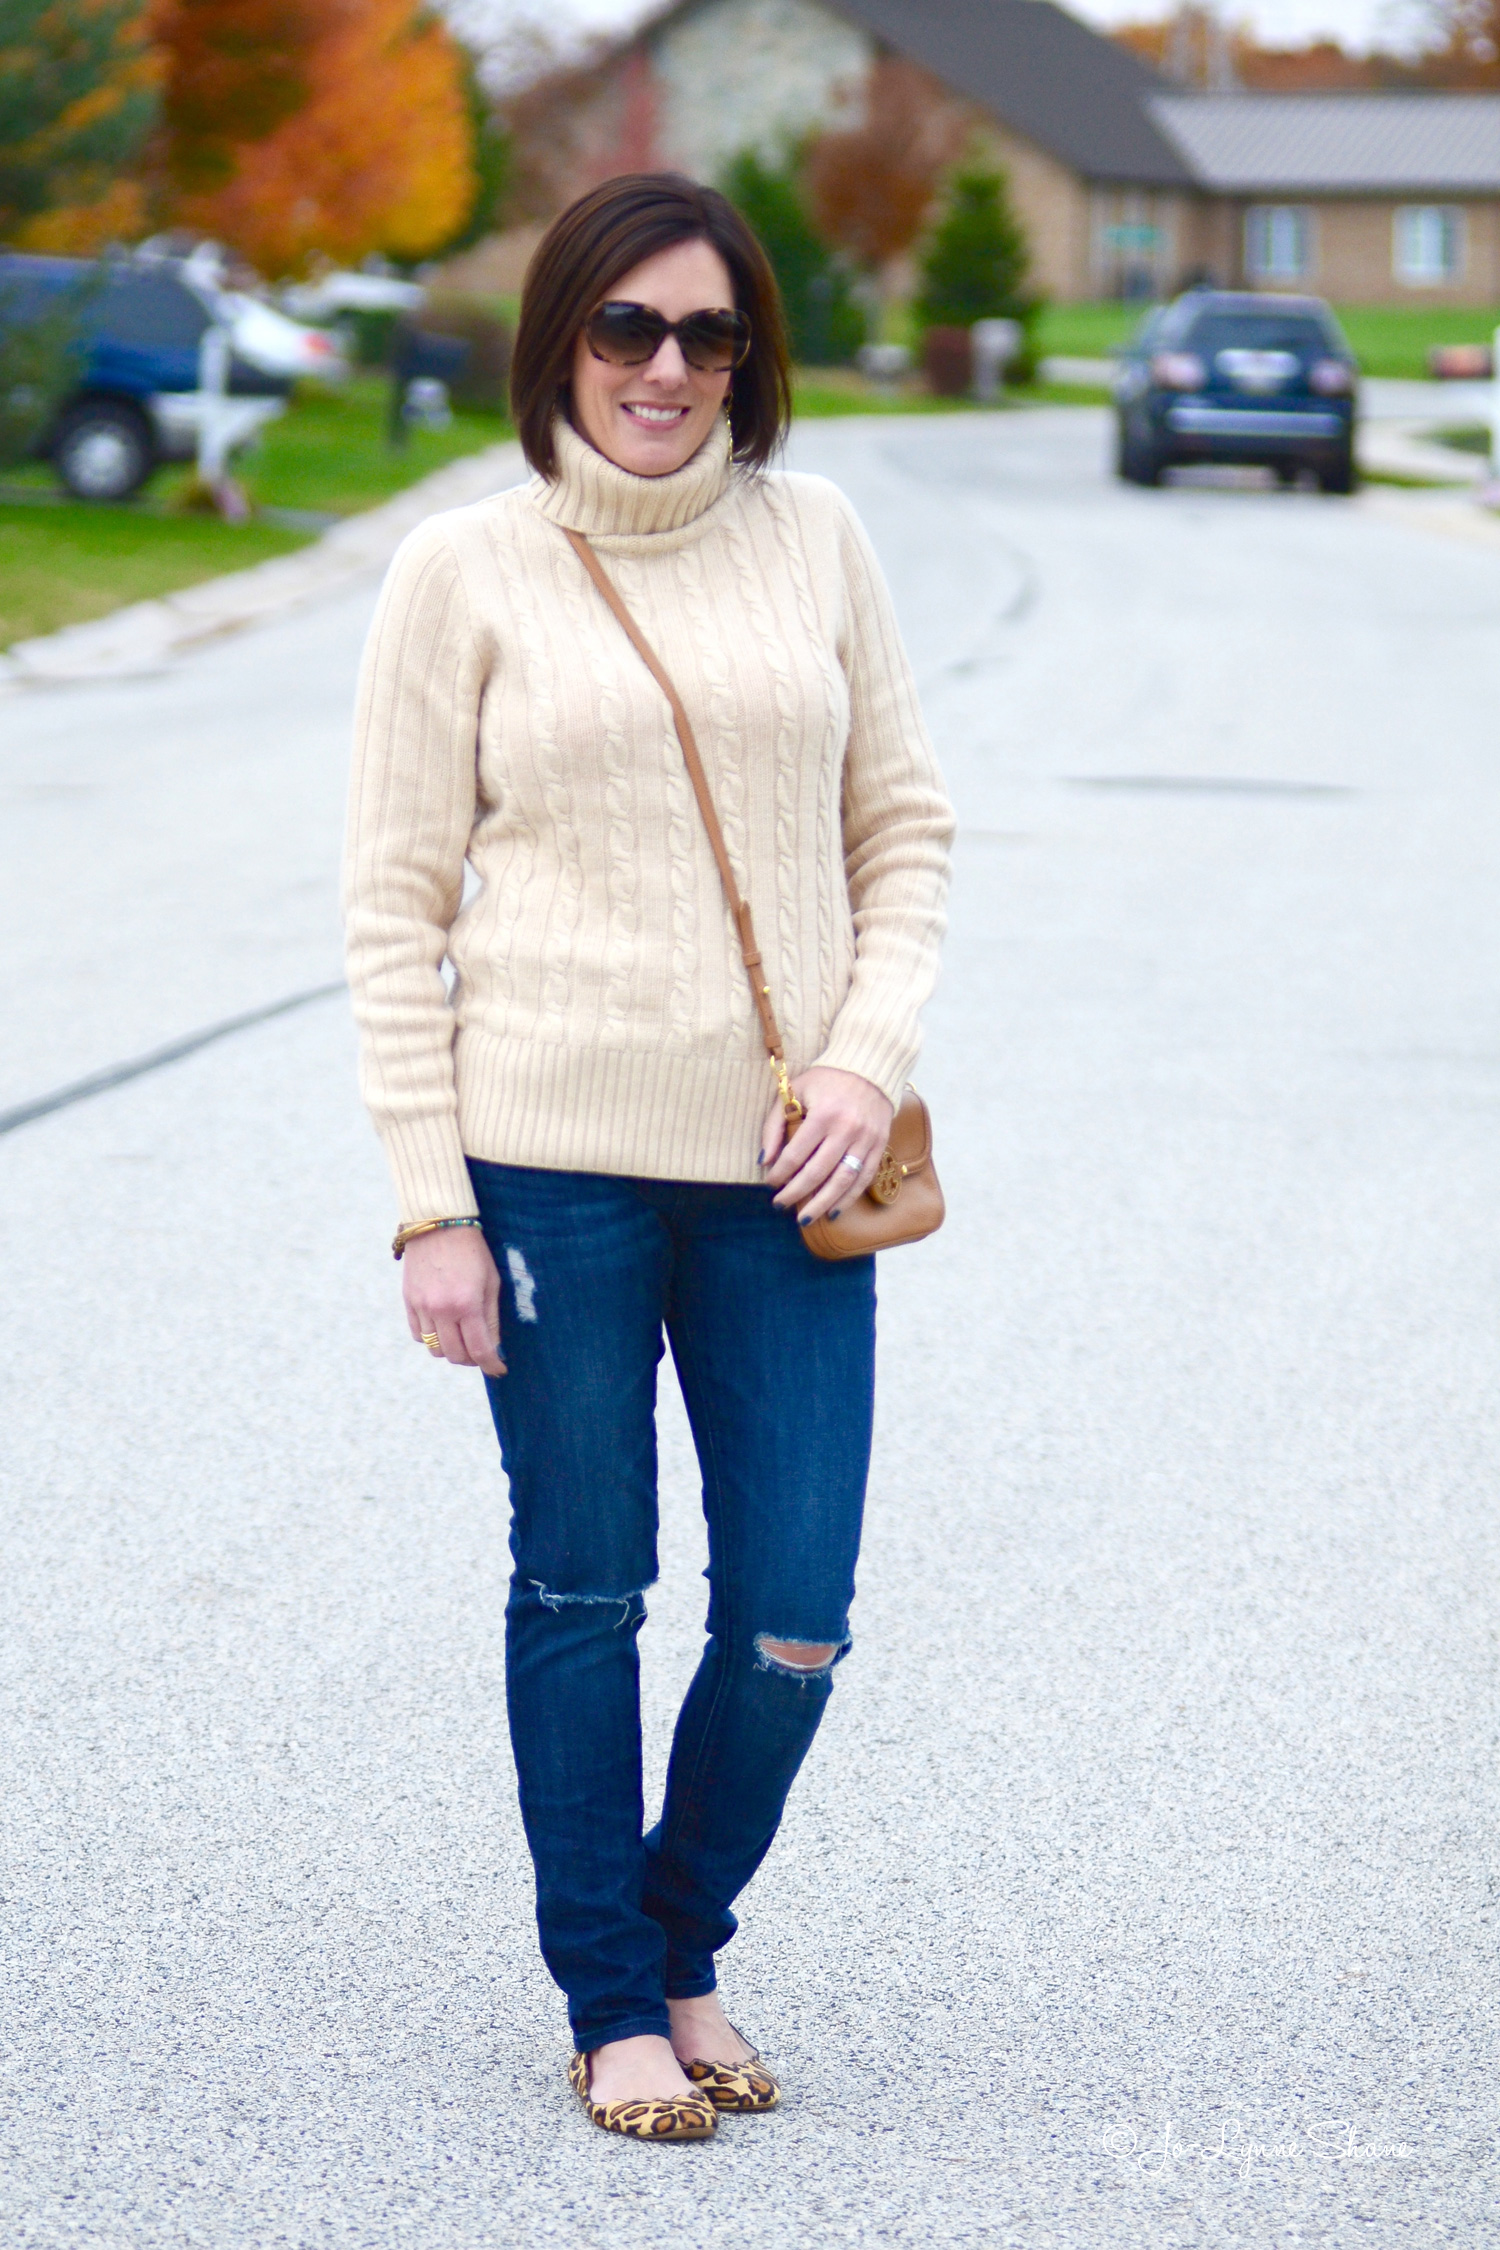 Fall Fashion for Women Over 40: Cambridge Cable Chunky Turtleneck with Destructed Jeans and Leopard Flats